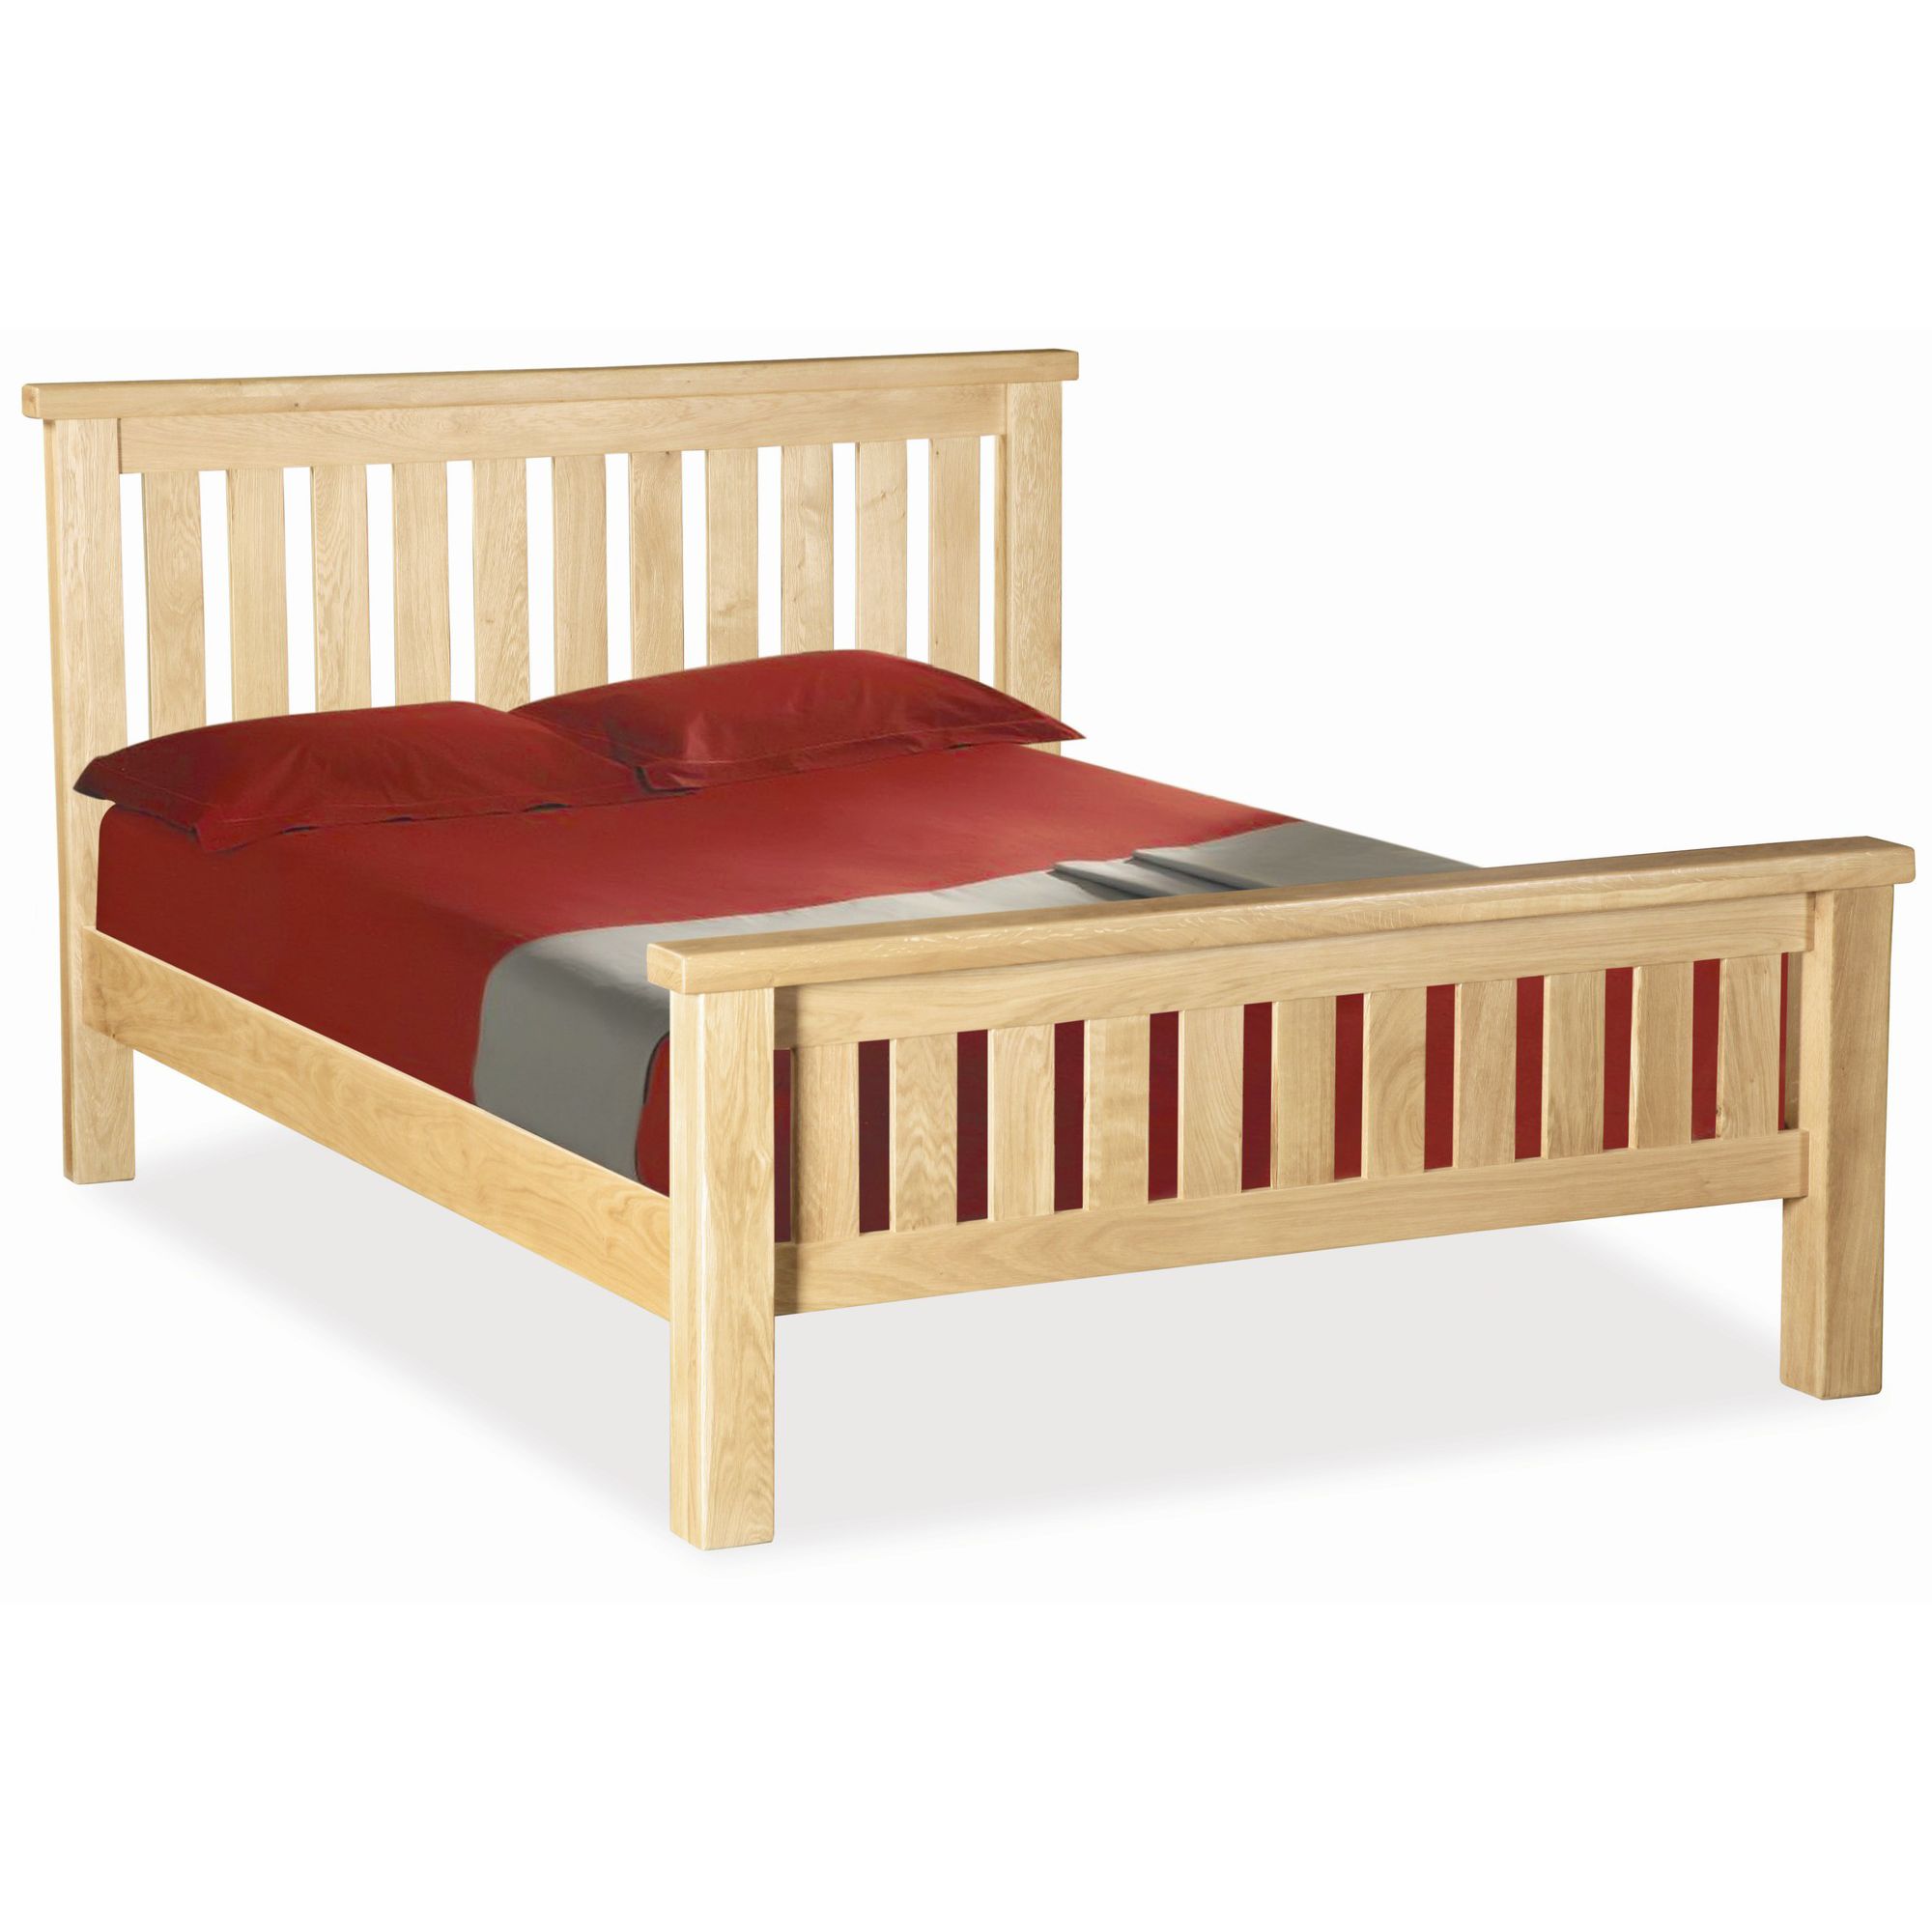 Alterton Furniture Chatsworth Slatted Bed - King at Tesco Direct